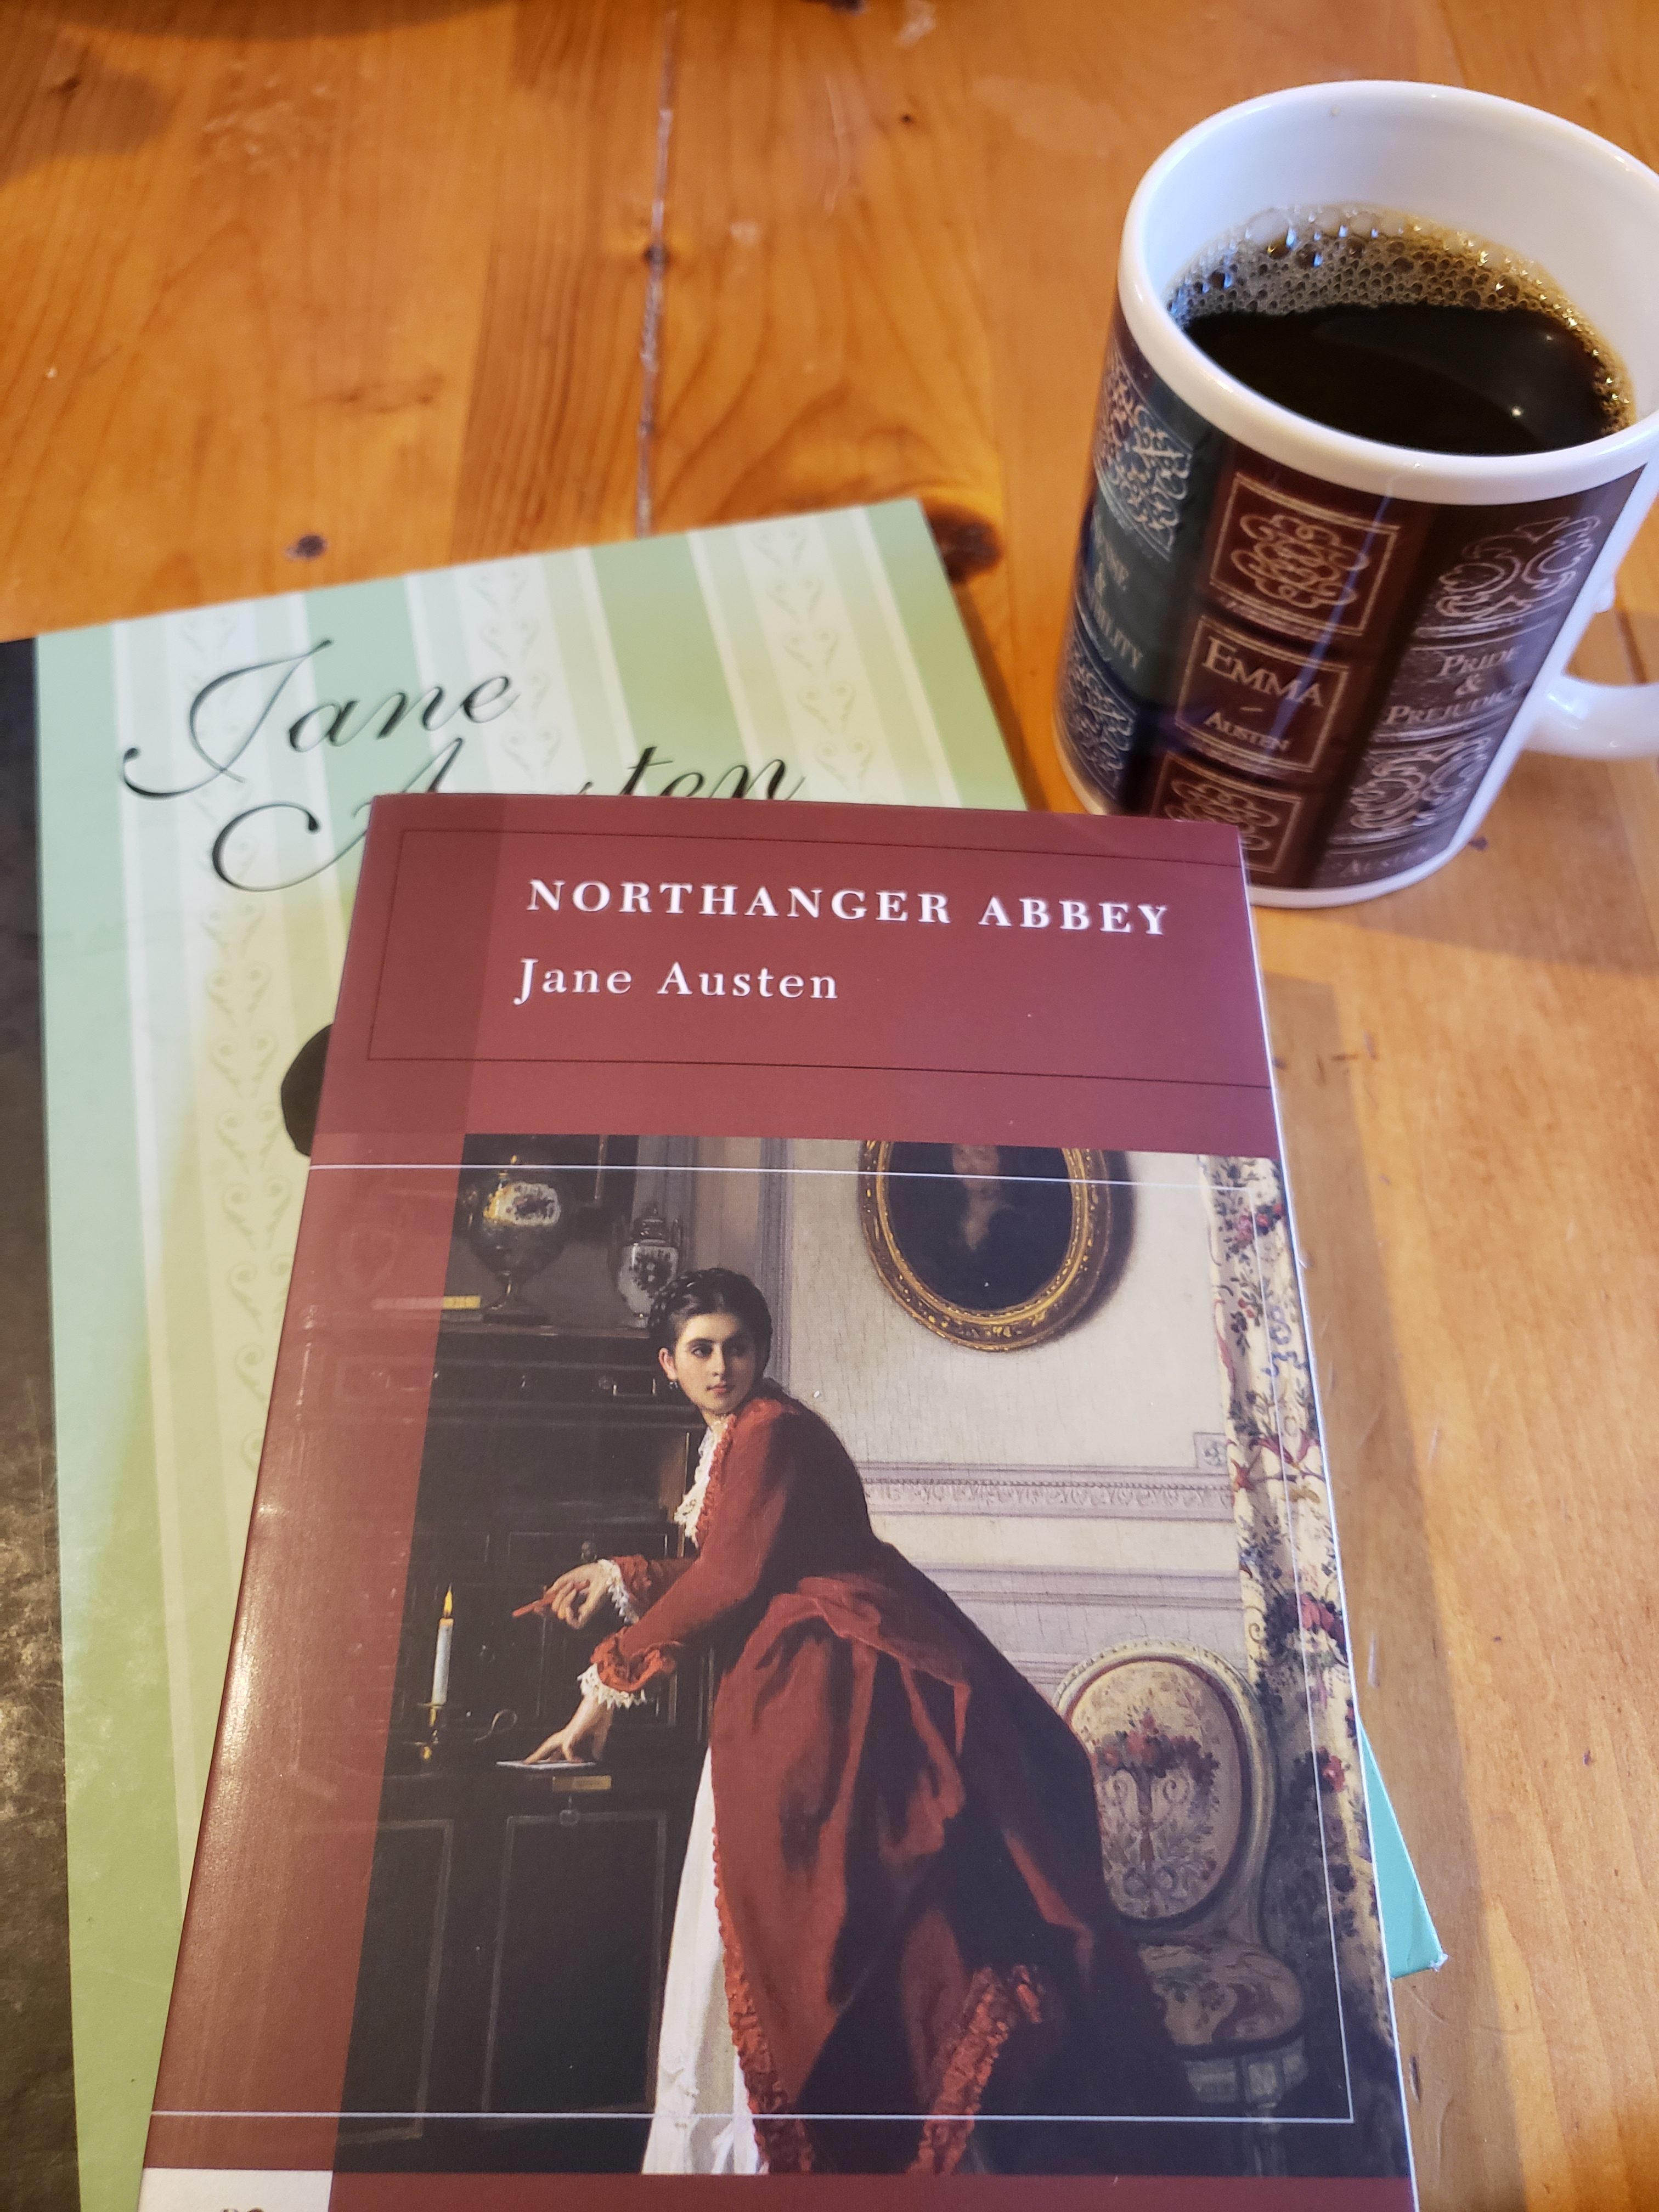 My Continued Education in all Things Jane Austen